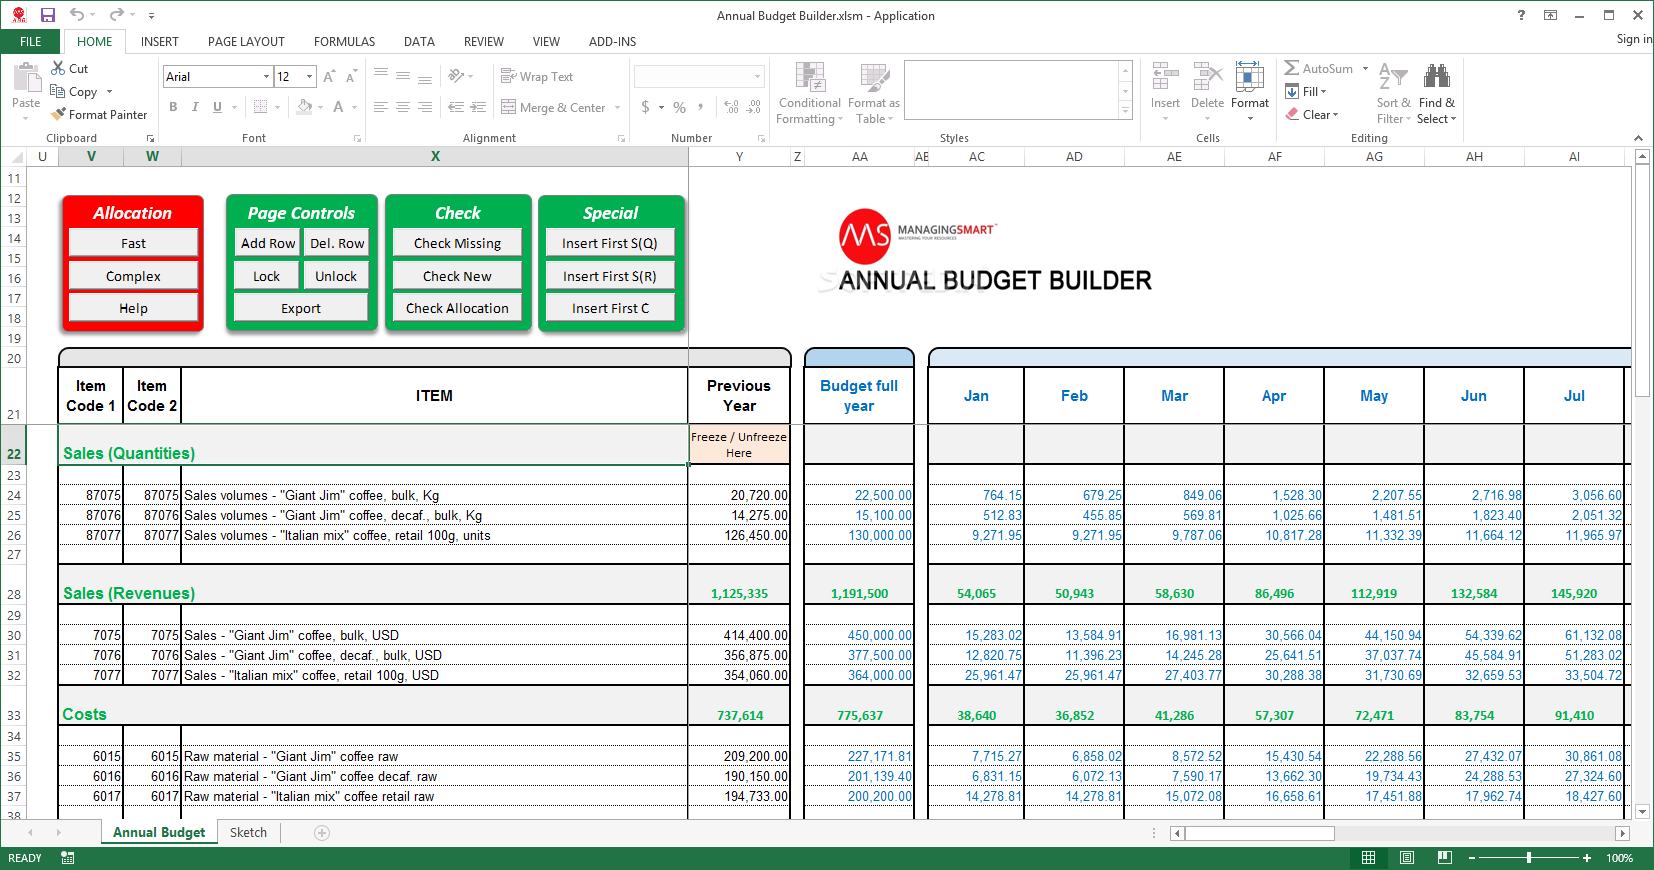 Annual Budget Builder